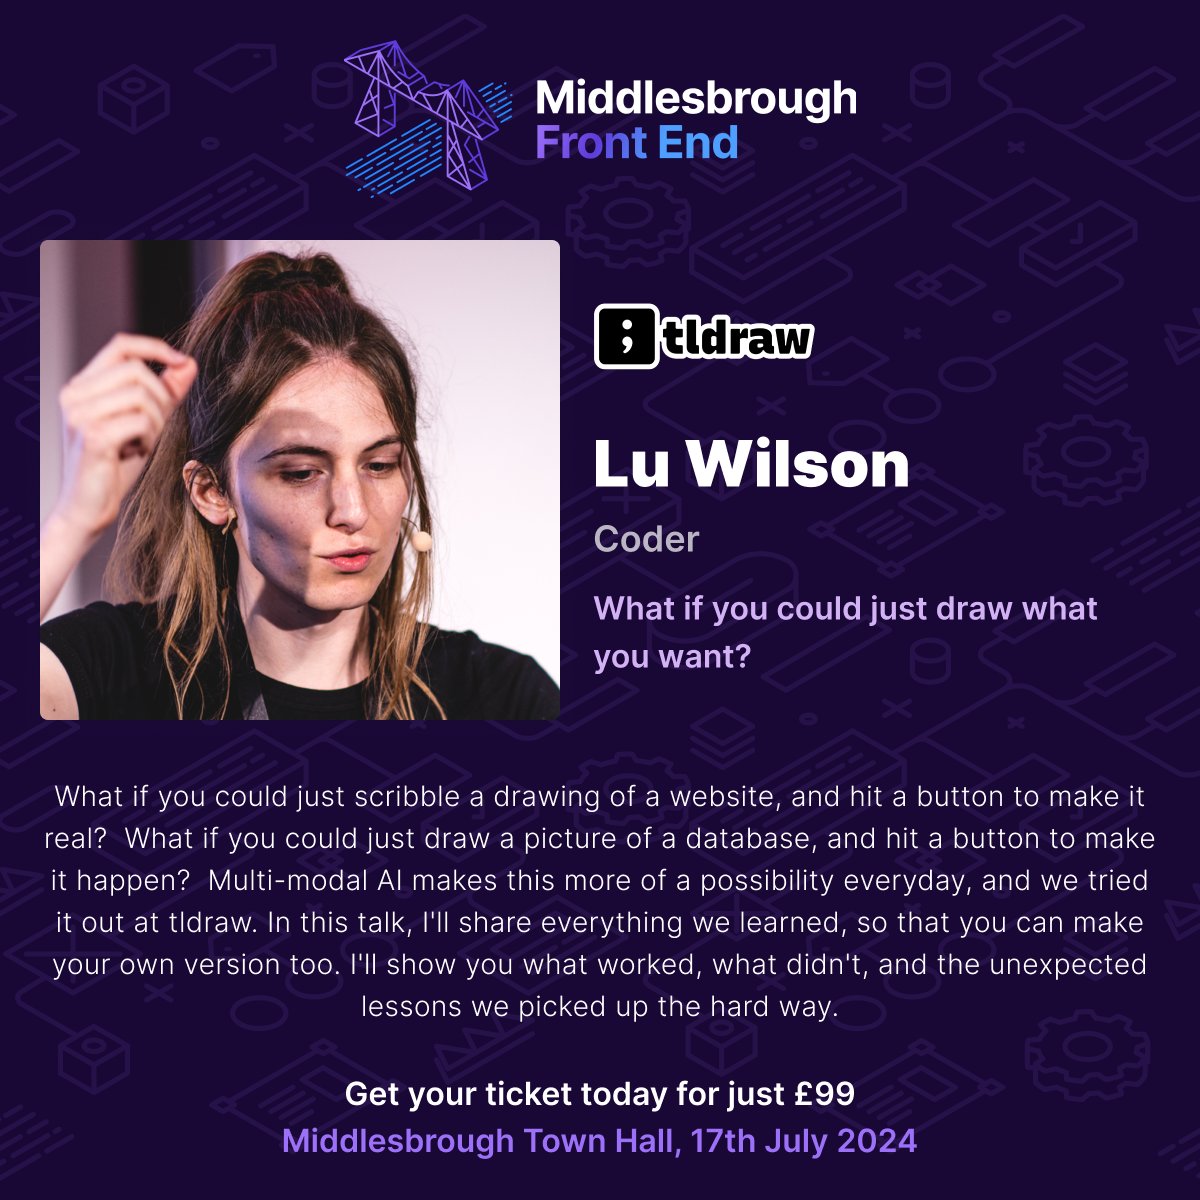 We're excited to announce that Lu Wilson (@TodePond) from @tldraw is joining the 2024 Conference Line up! We can't wait to hear Lu's talk 'What if you could just draw what you want?' 🎟️ Tickets just £99 👉 loom.ly/VjwjCks